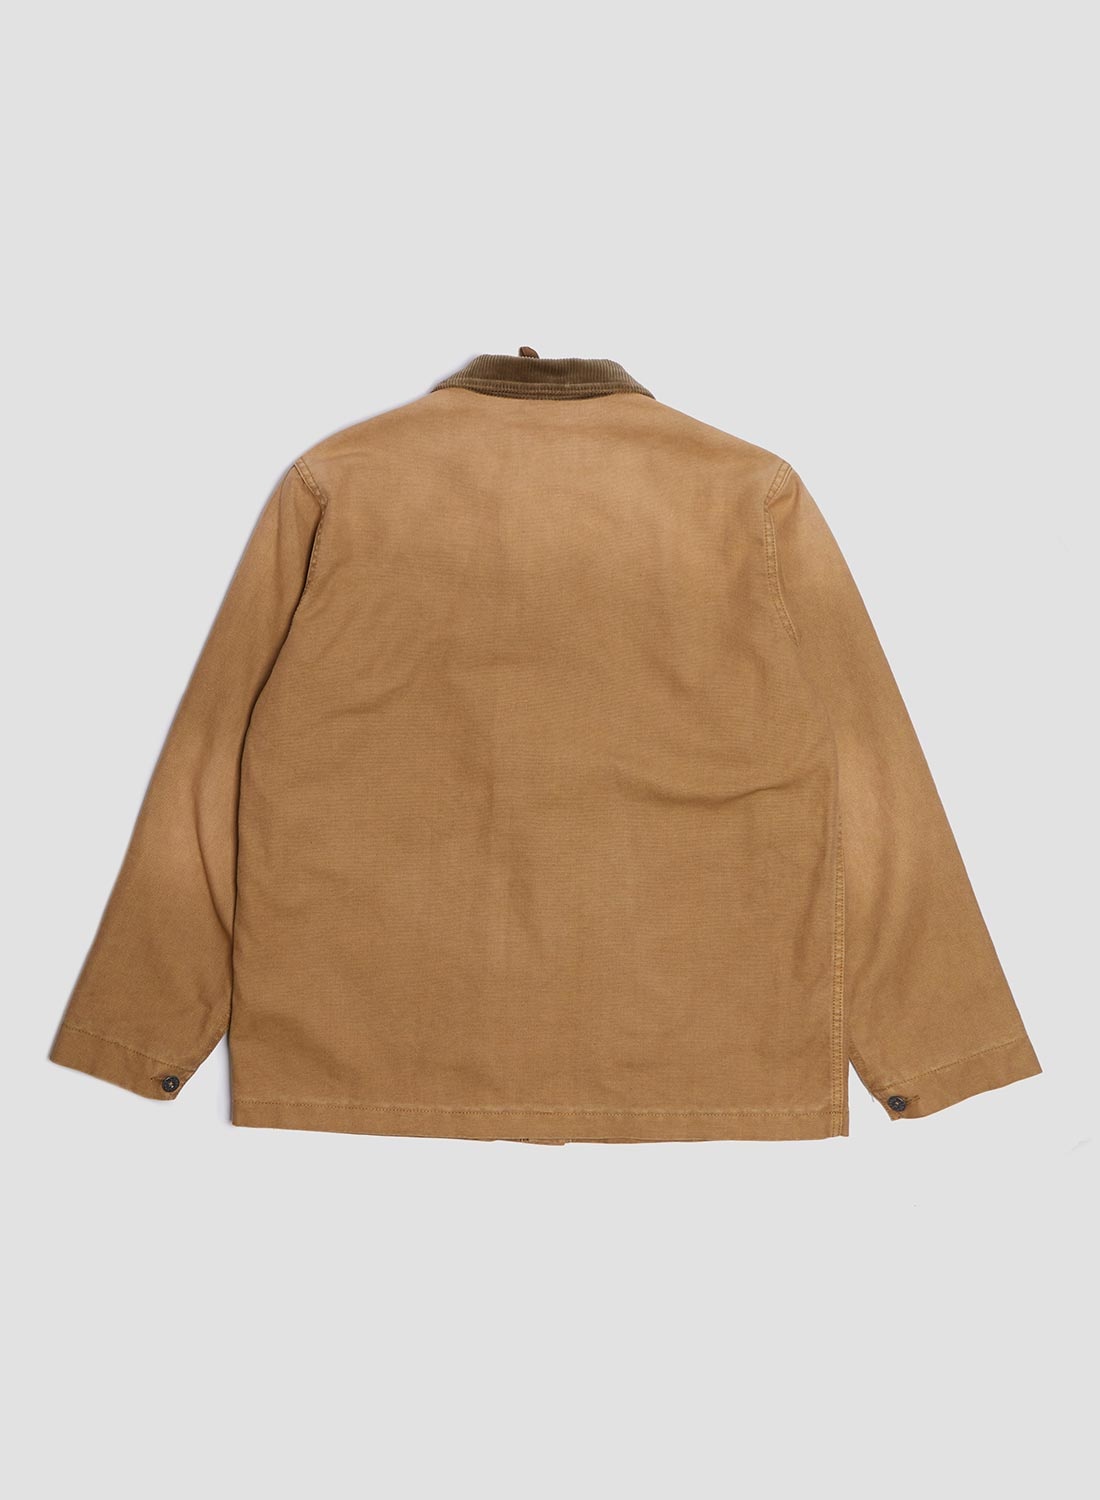 Hunting Chore Jacket Canvas in Tan - 8